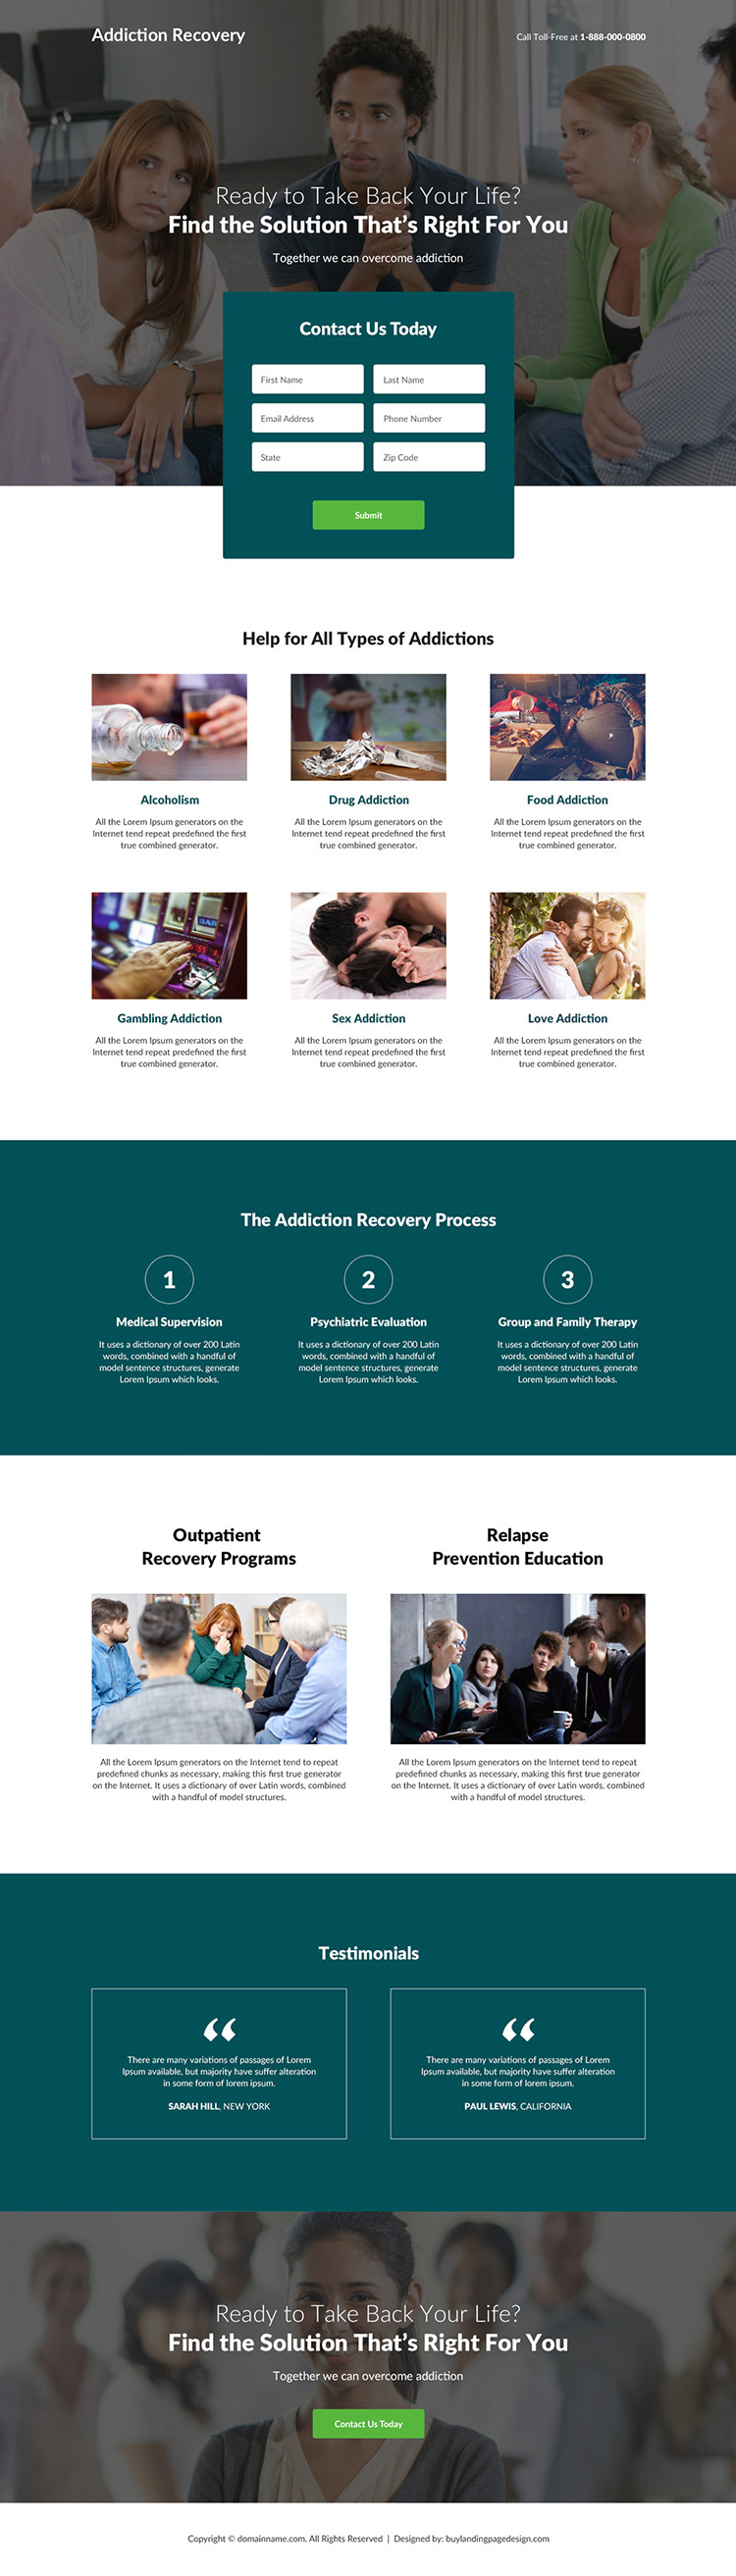 addiction recovery and treatment center landing page design